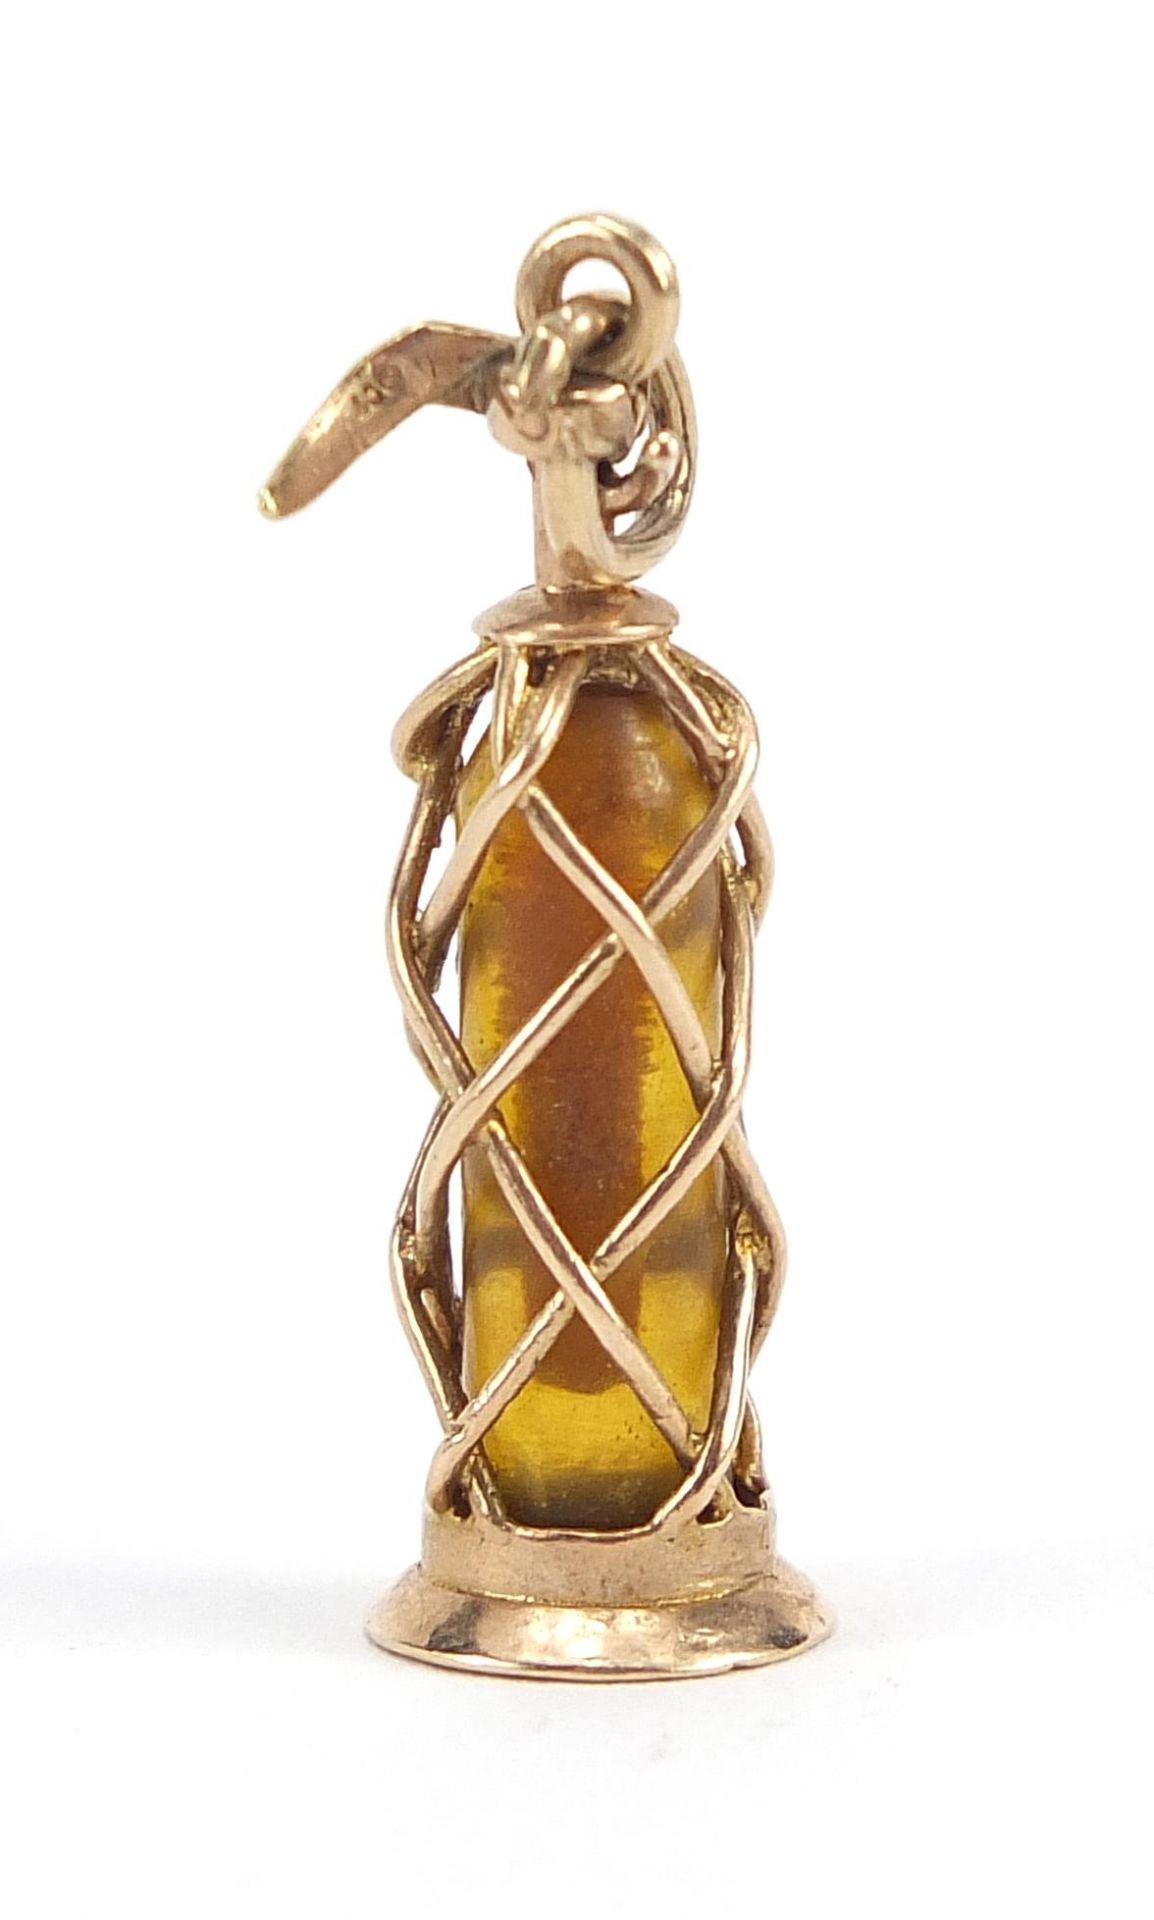 9ct gold soda syphon charm, 2.6cm high, 1.6g - Image 2 of 8